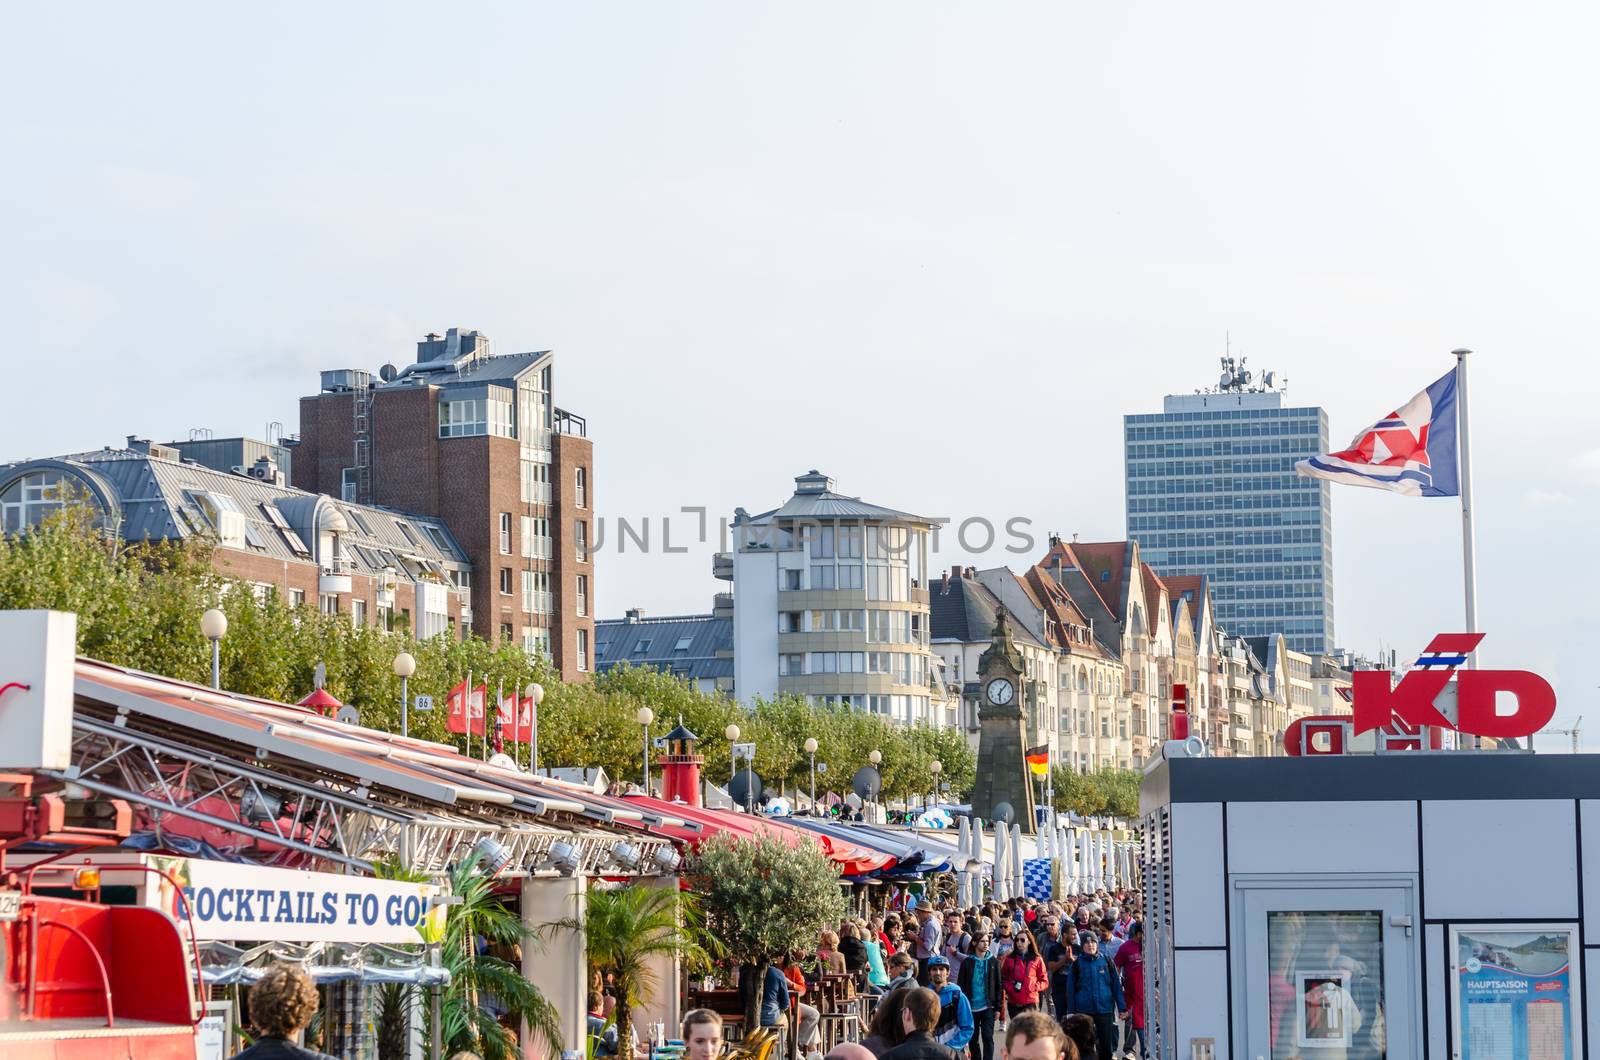 Dusseldorf Altstadt, Nrw, Germany - September 21, 2014: Rhine River Promenade in Dusseldorf Atlstadt.Die shore promenade in the old town of Düsseldorf designed by architects Niklaus Fritschi is one of the most beautiful.